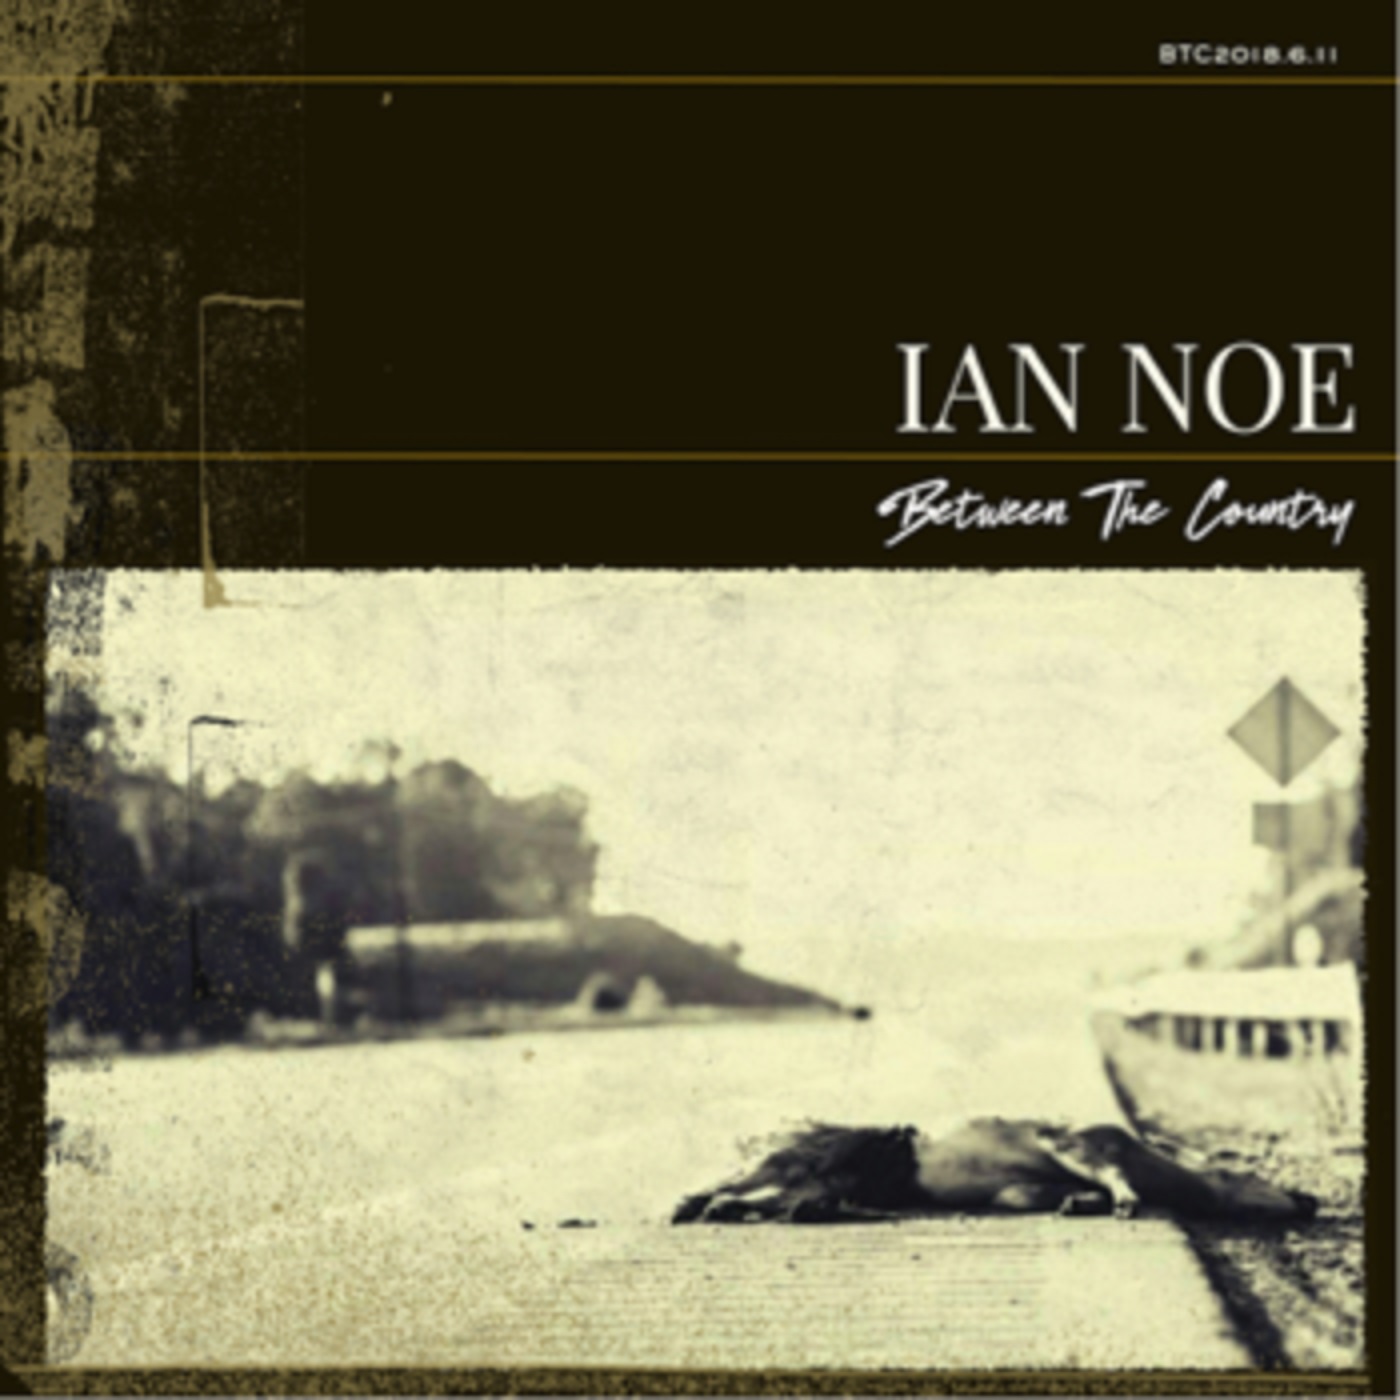 Ian Noe – Between the Country (cover art)